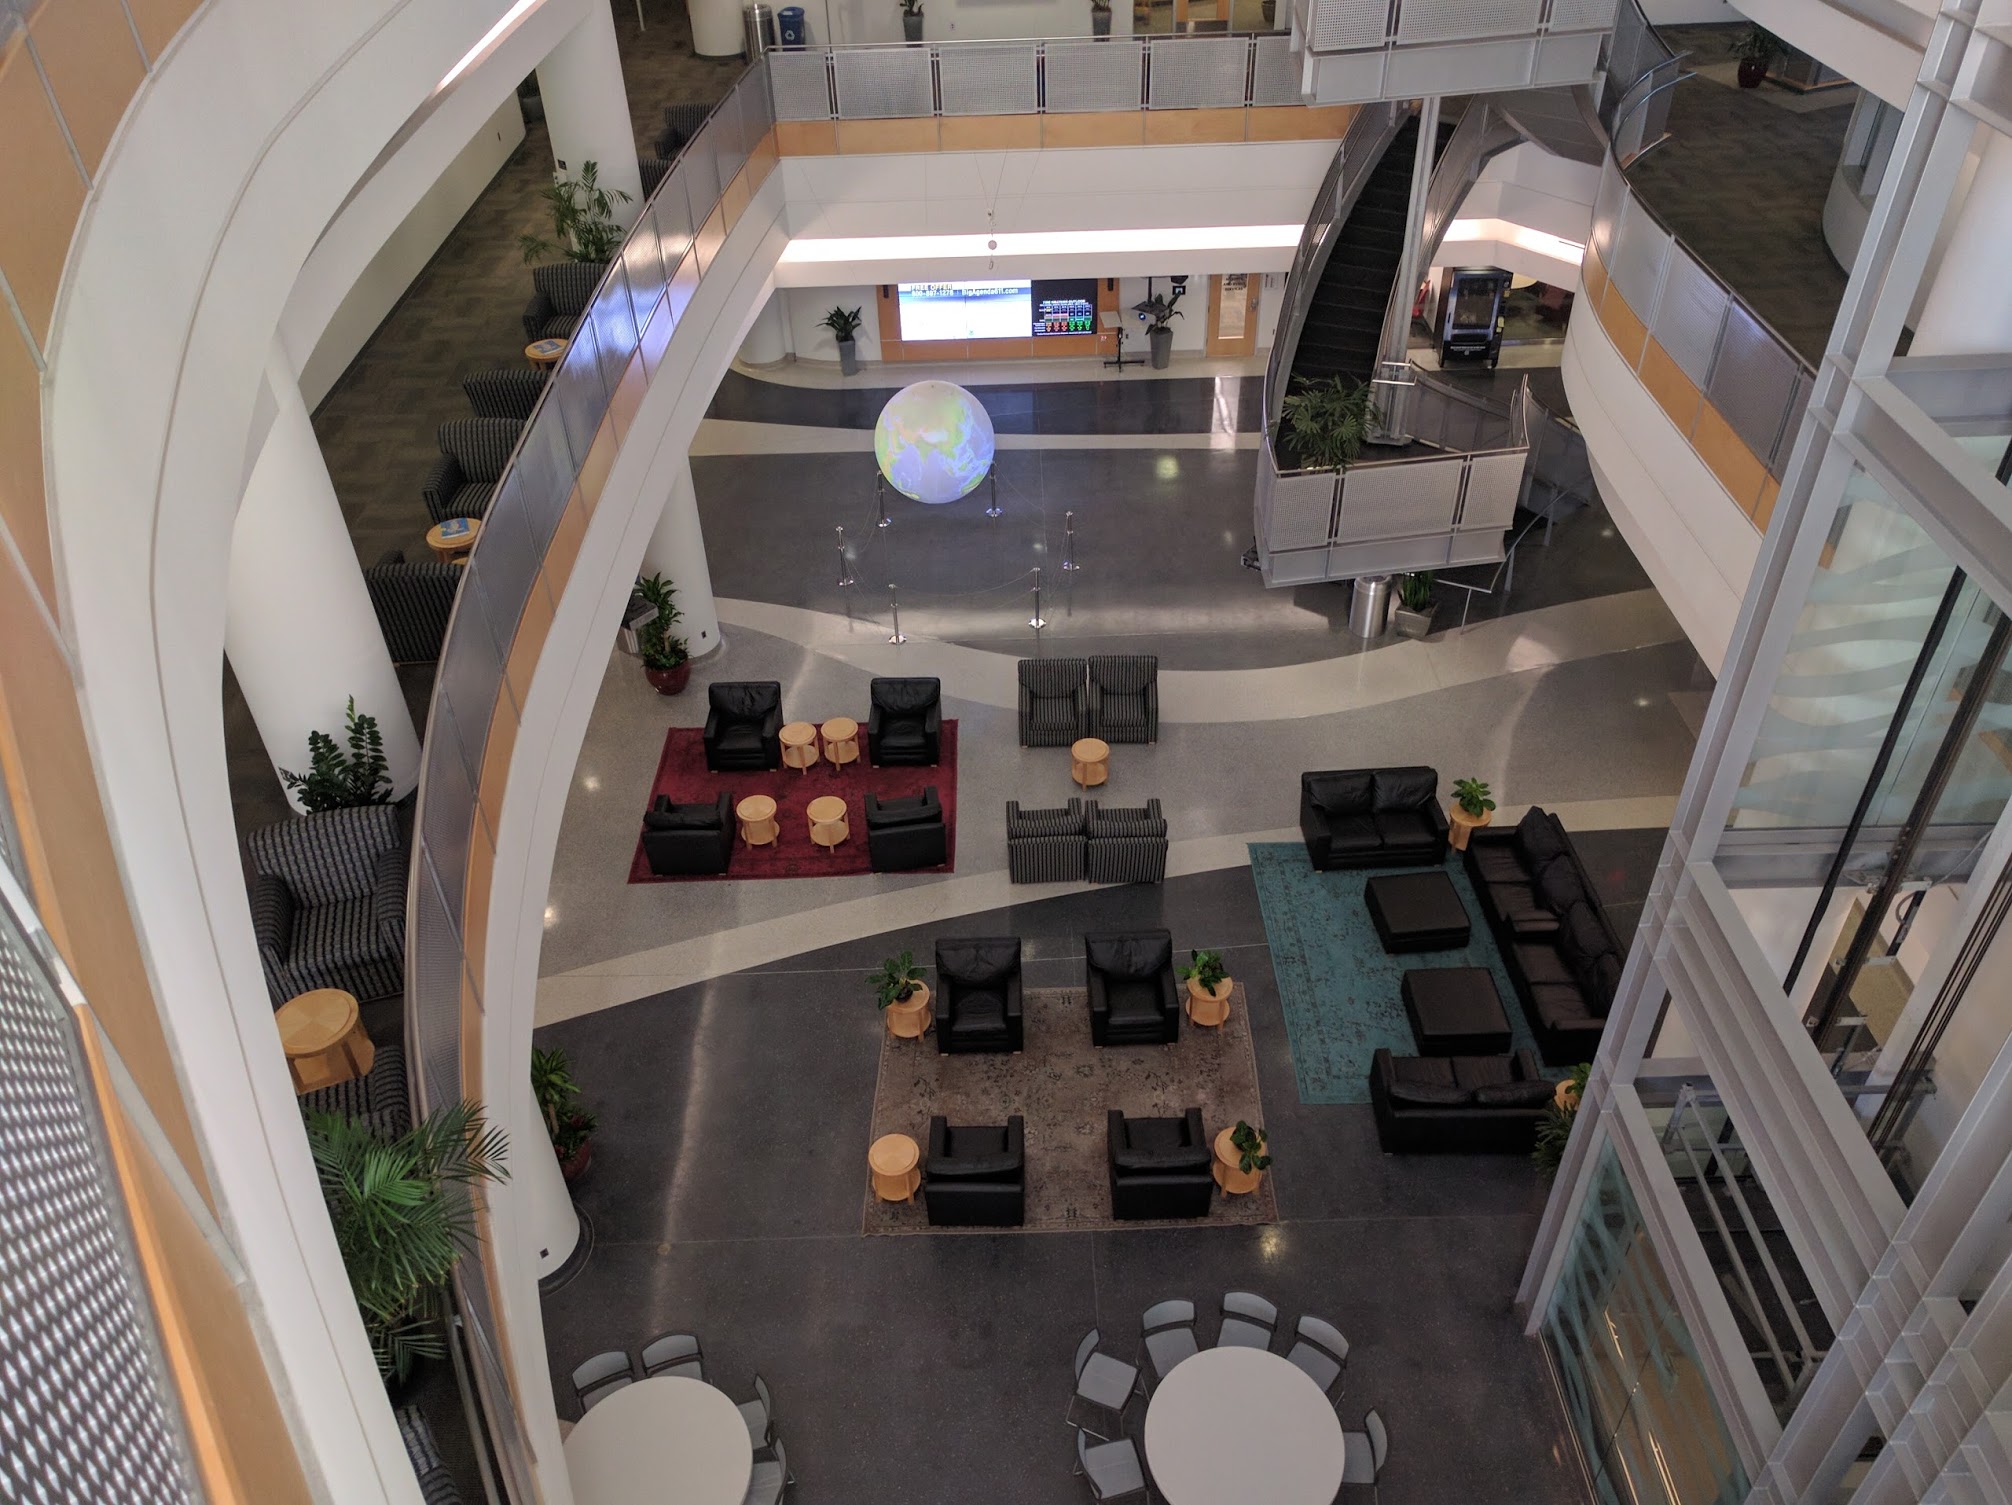 National Weather Center atrium viewed from 3rd floor